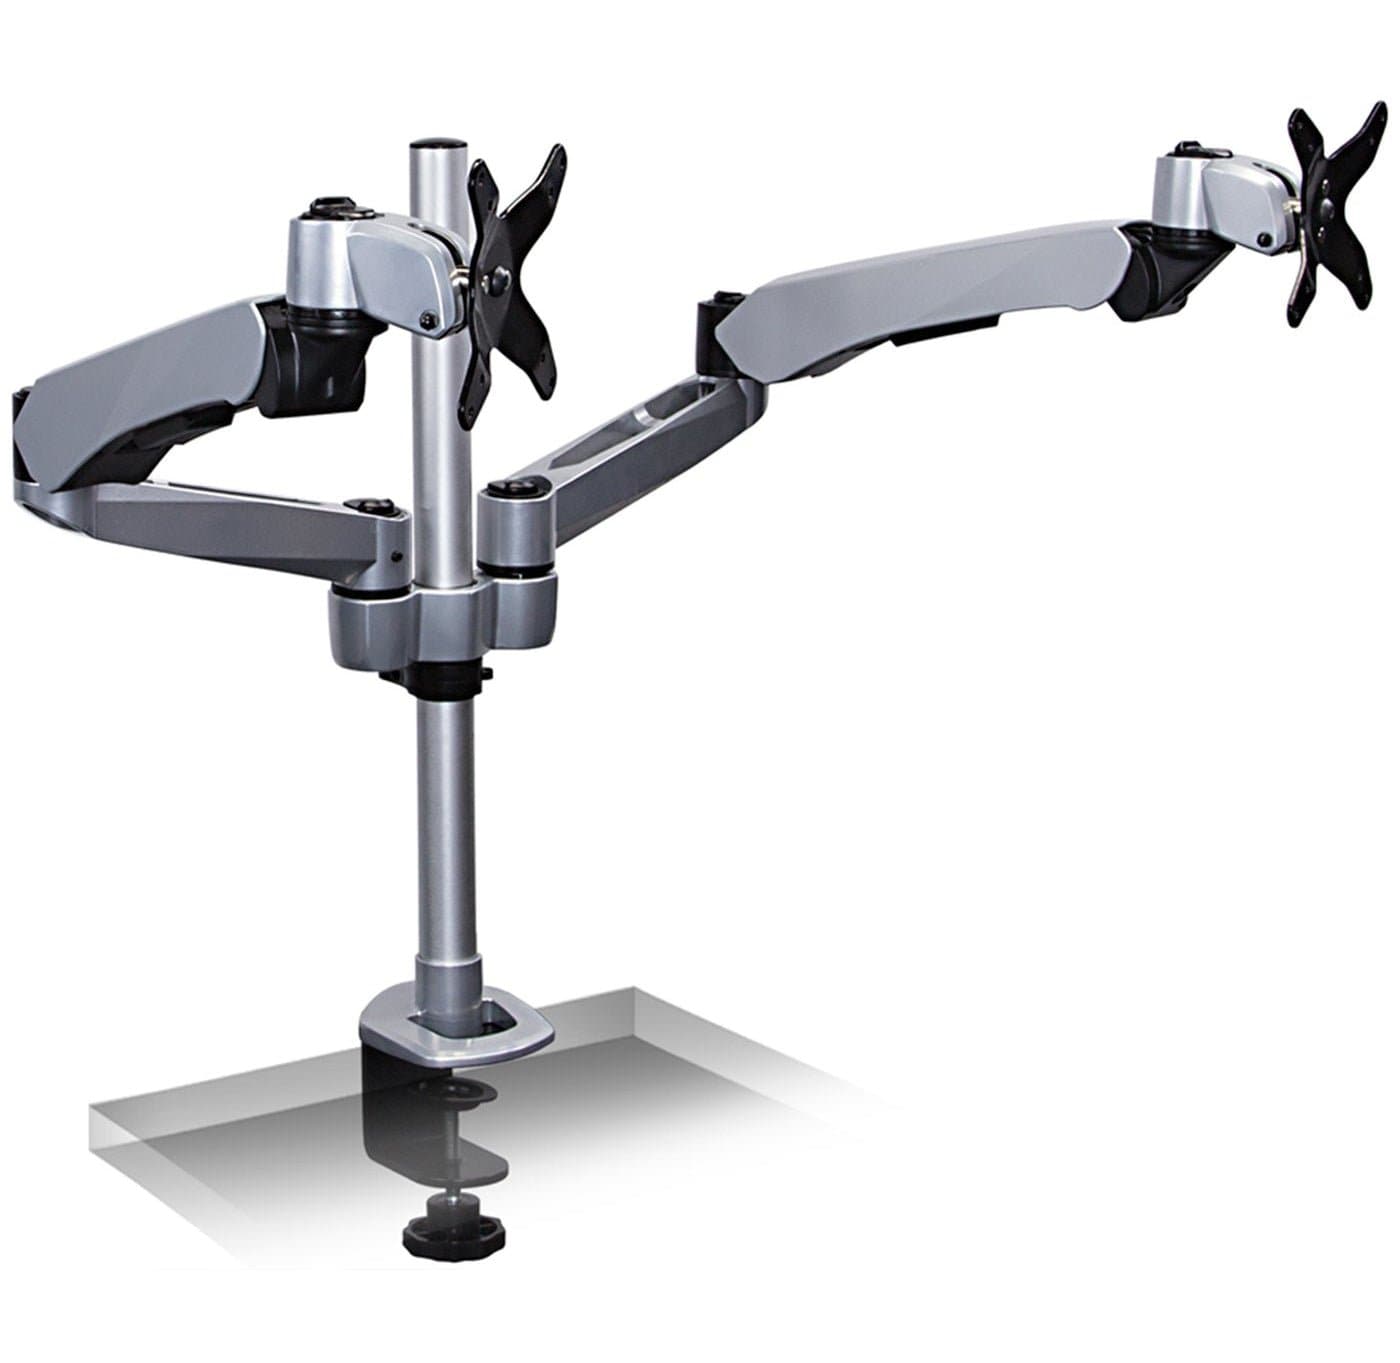 Extra-Tall Articulating Desk Mount | 13" to 27" Screens - Mount-It!